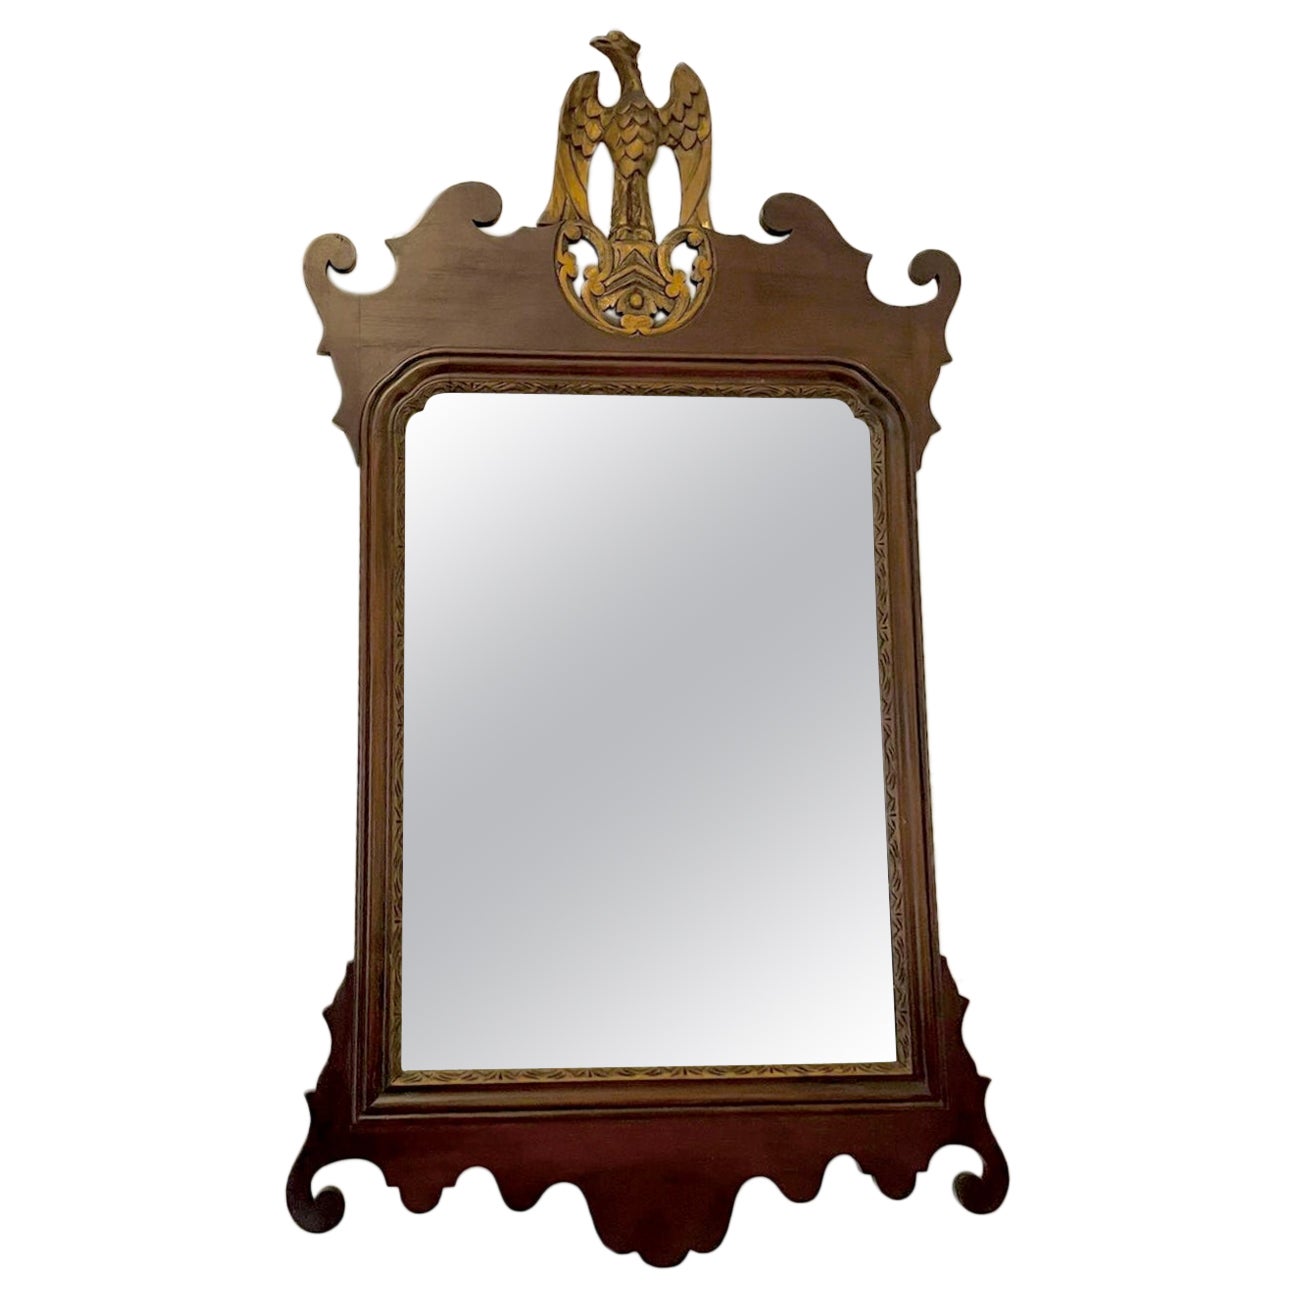 Large Antique Edwardian Inlaid and Gilt Mahogany Fretted Wall Mirror For Sale